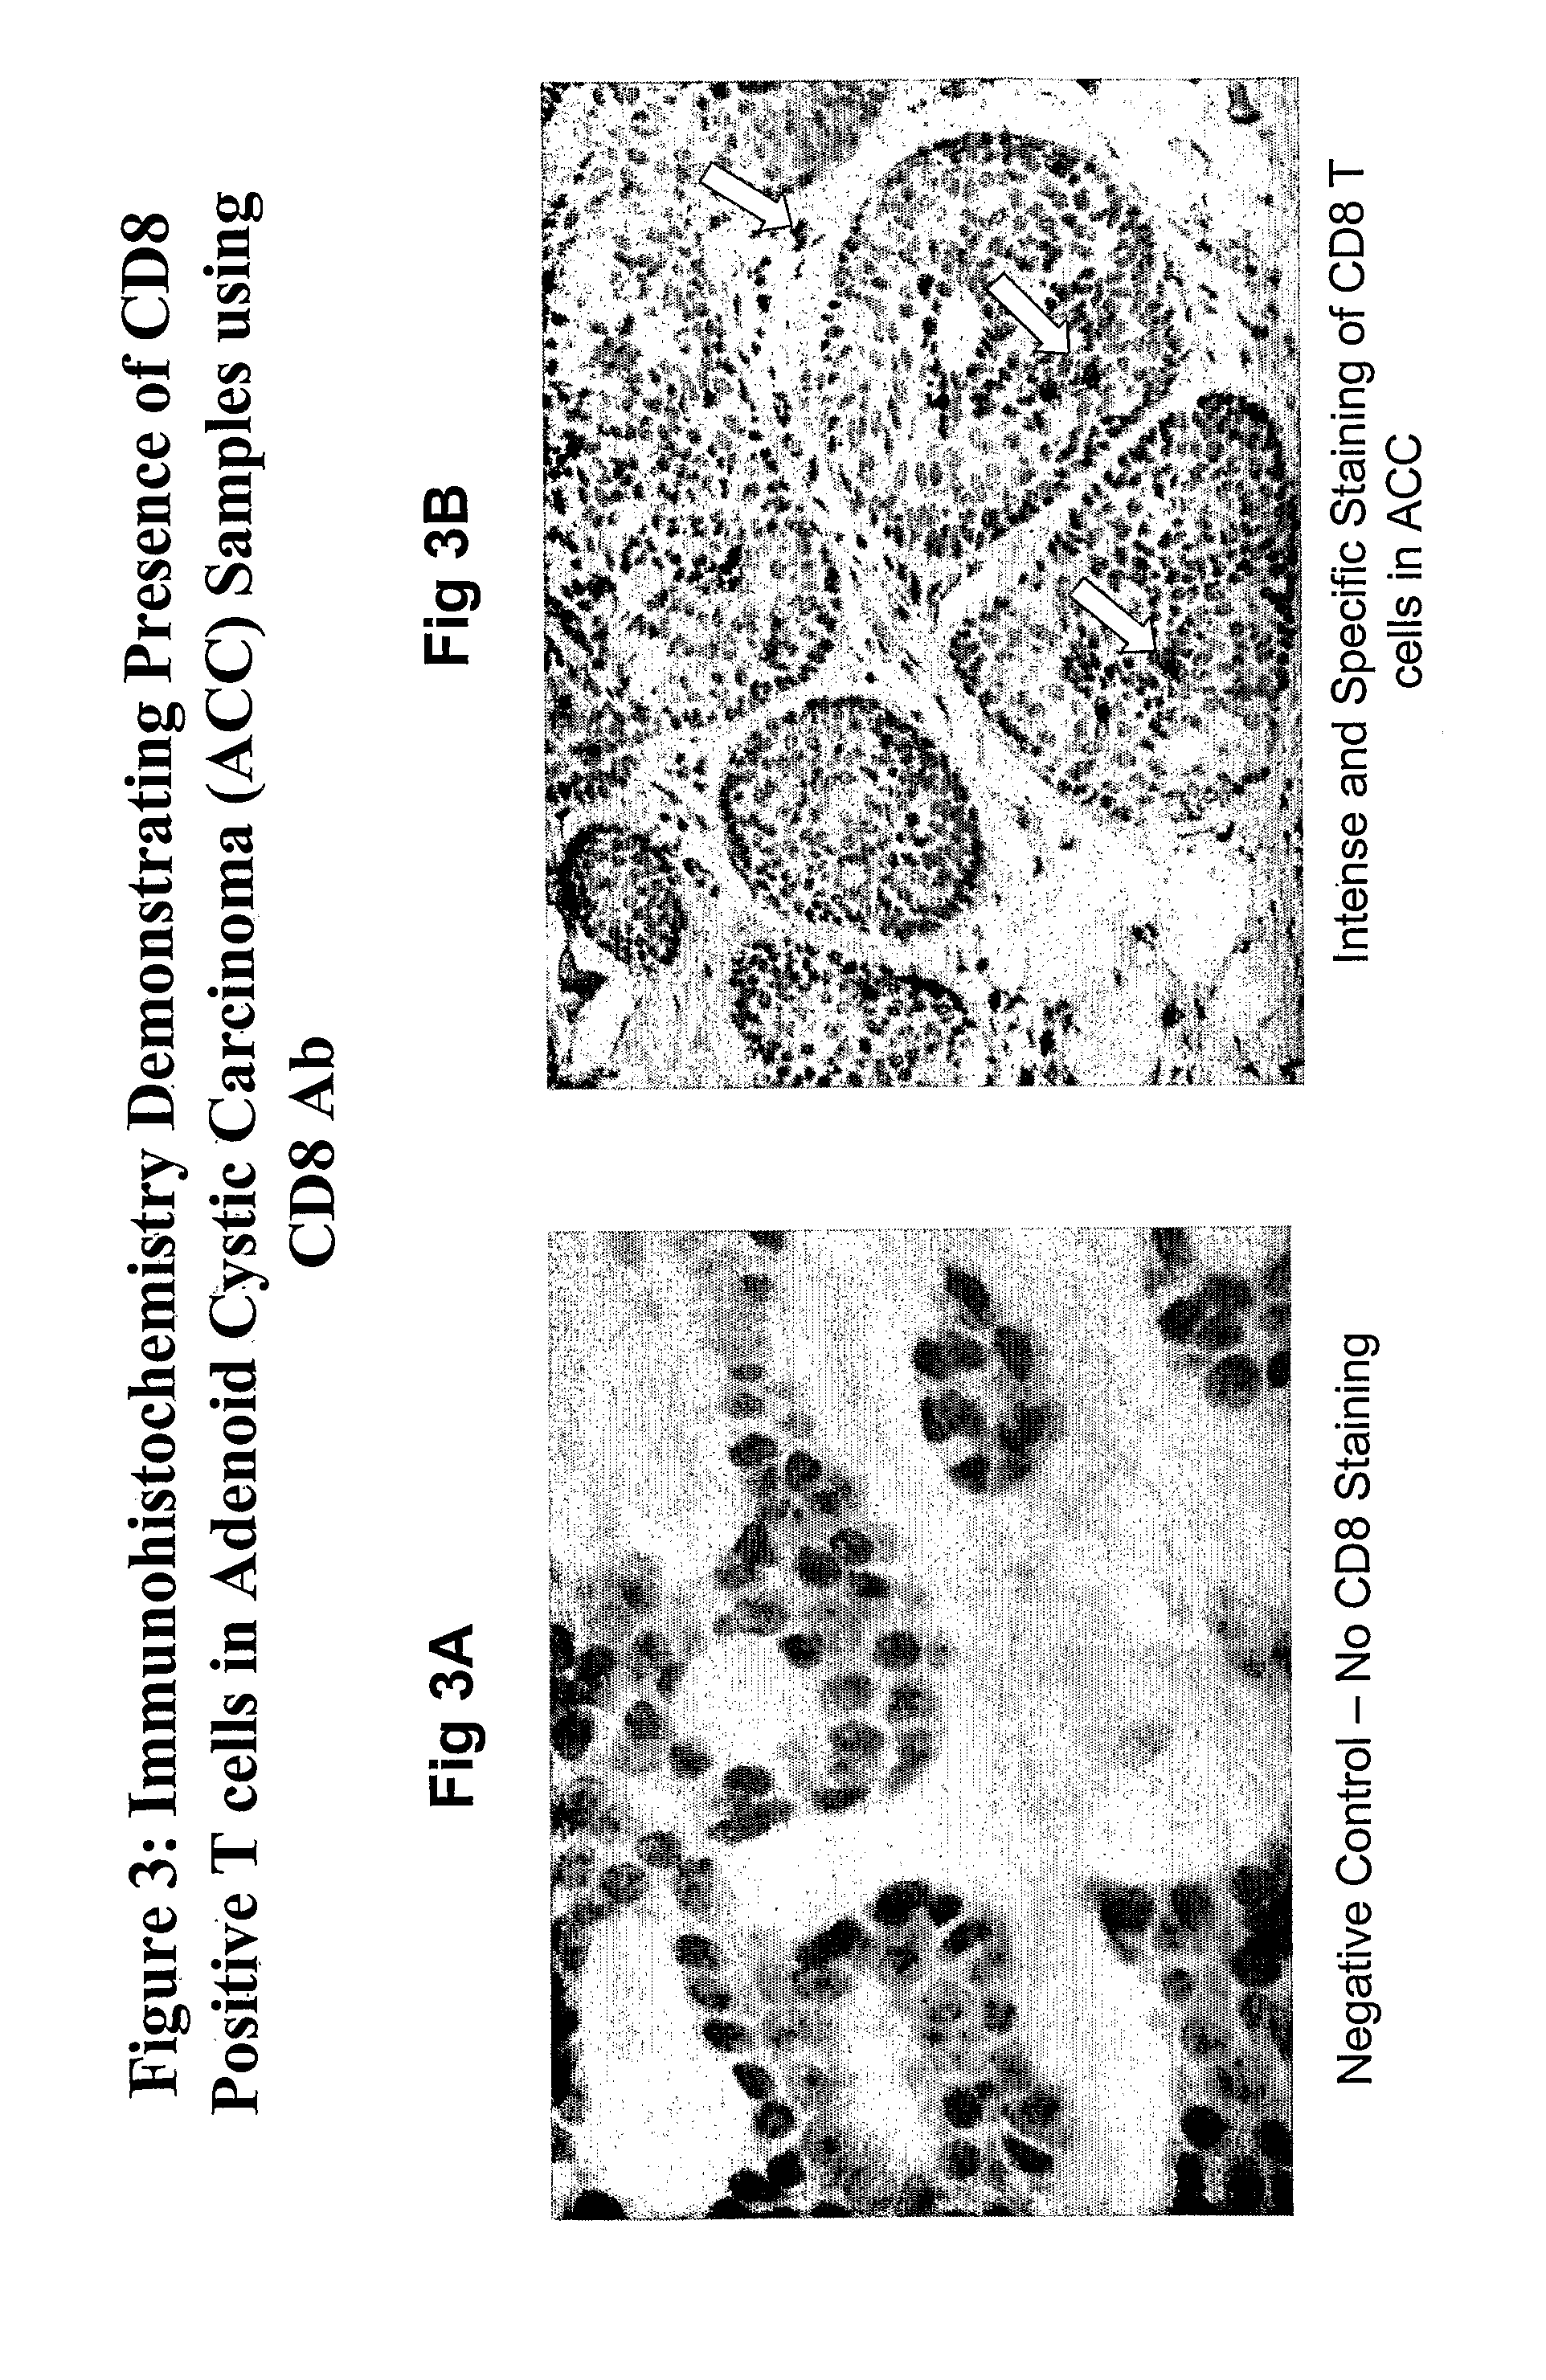 Ovr110 antibody compositions and methods of use